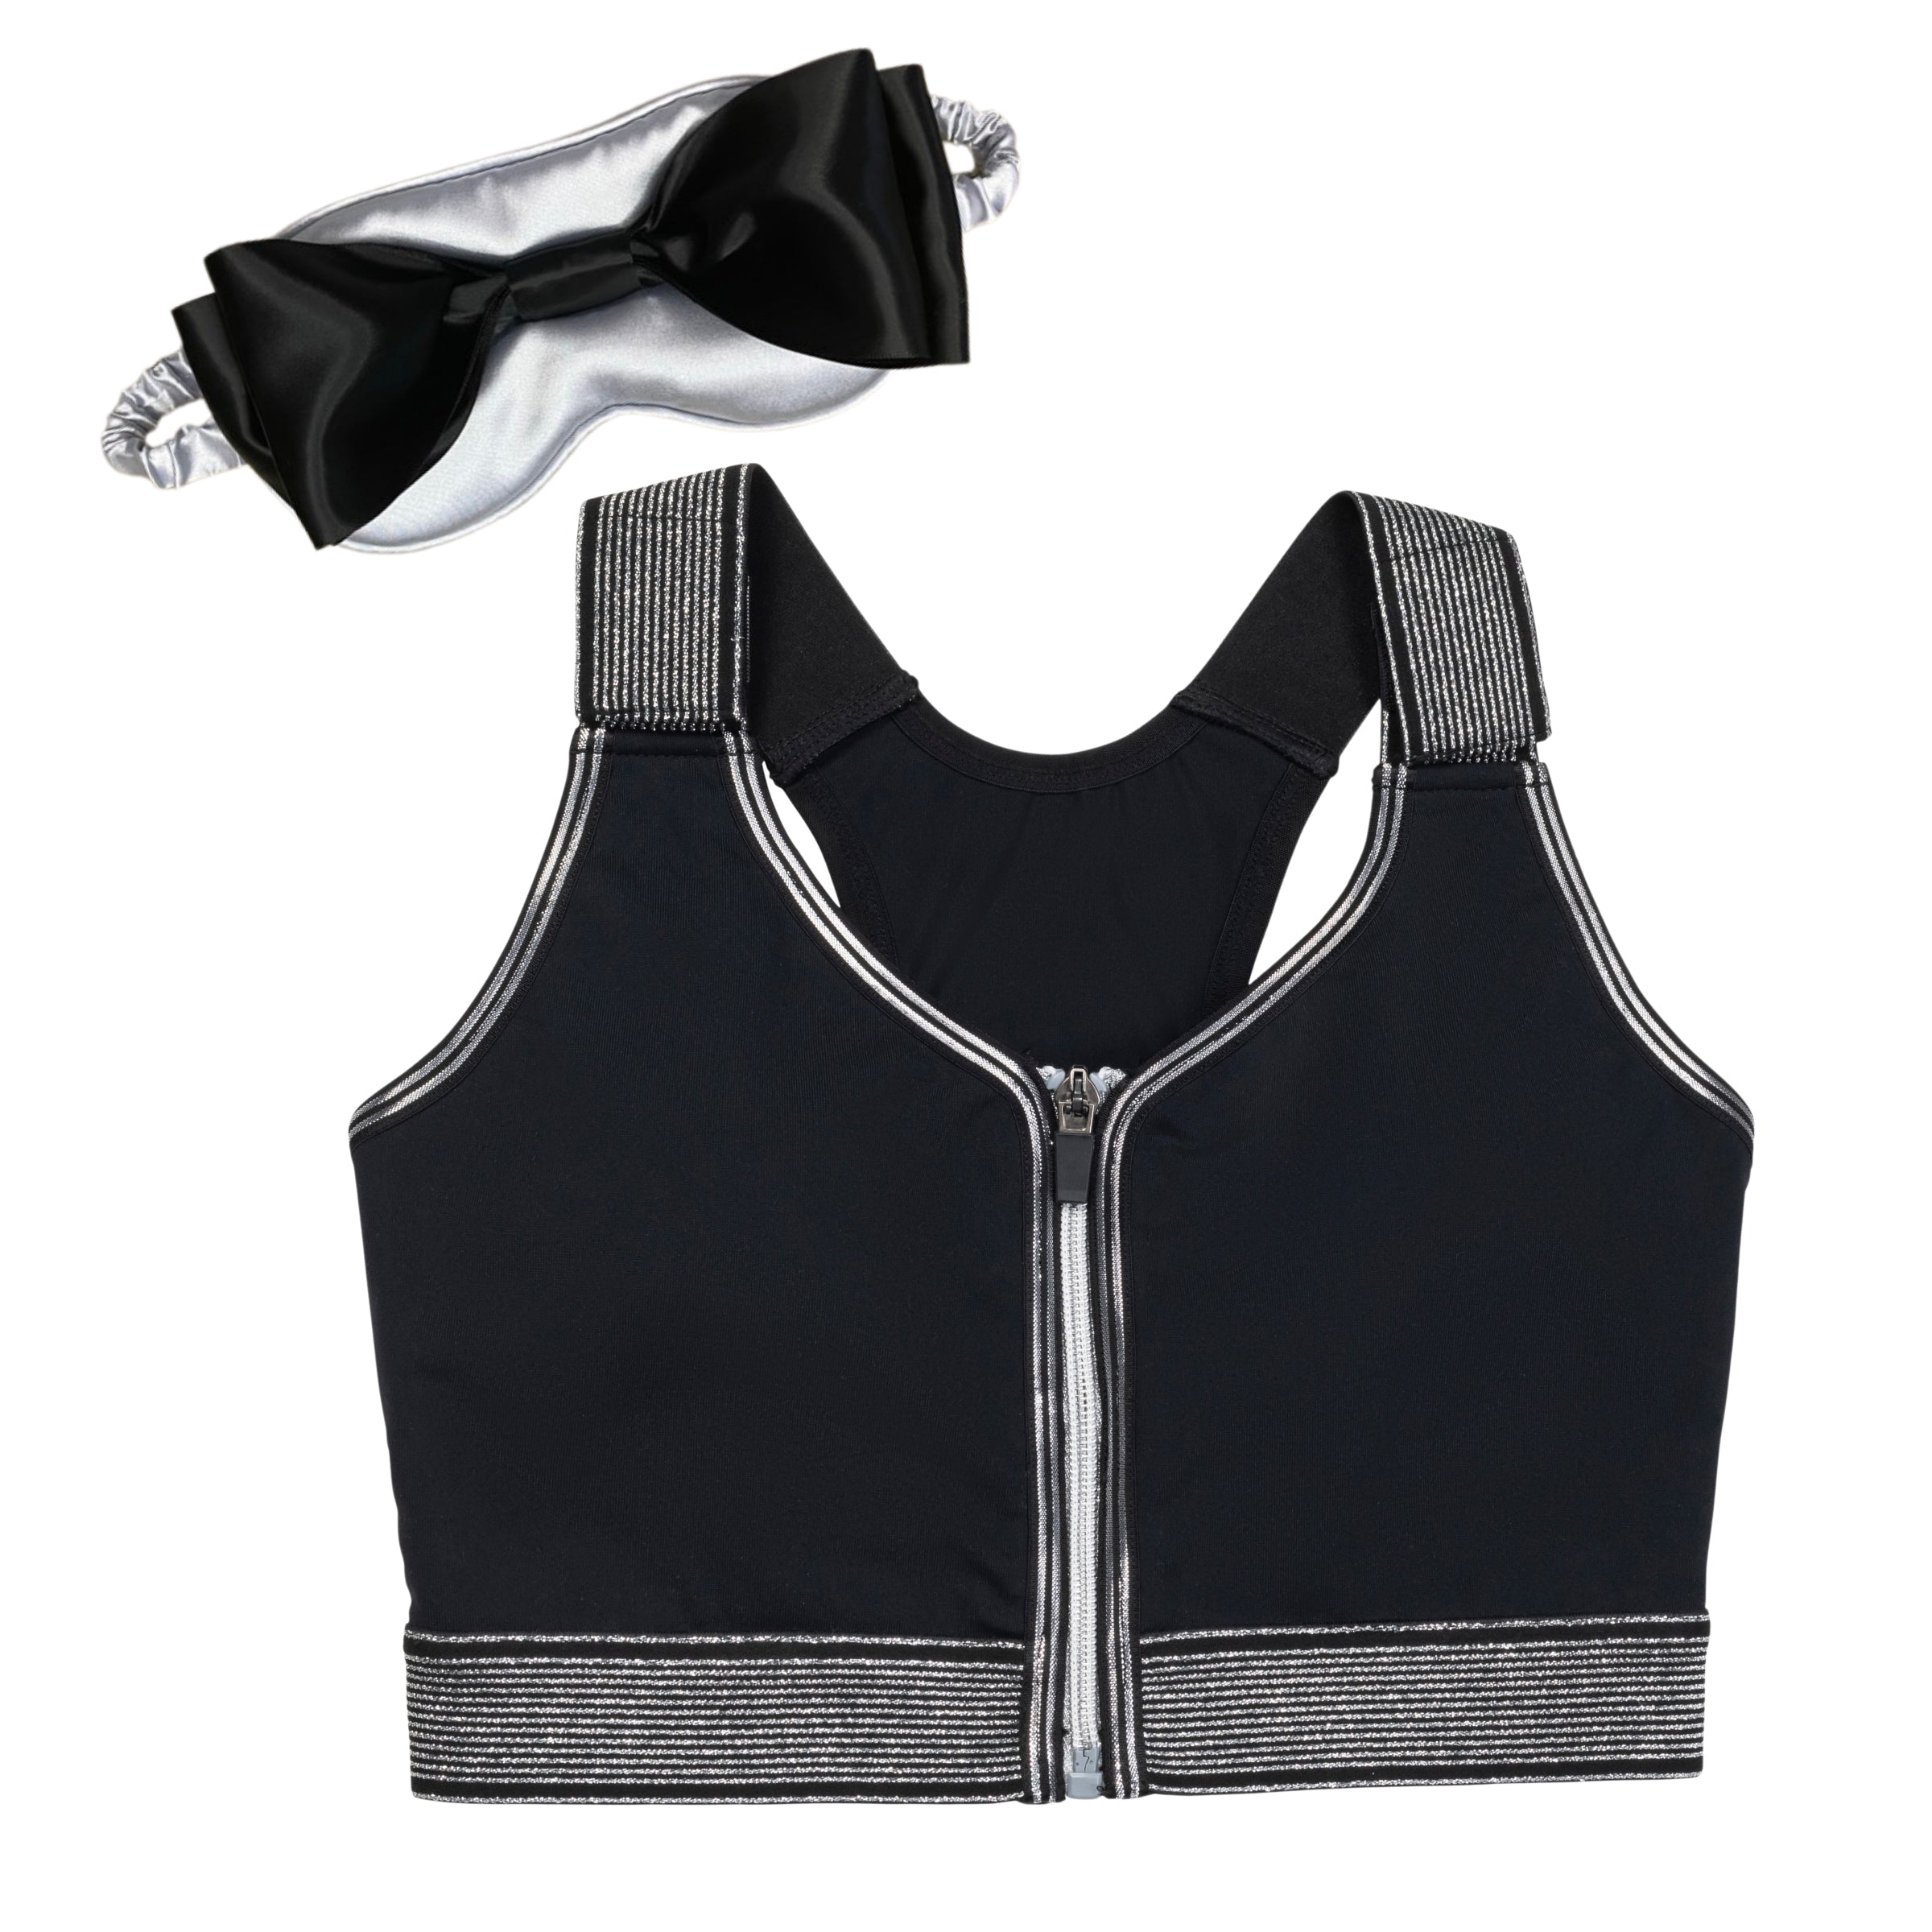 Surgical Support Bra - Black & Silver